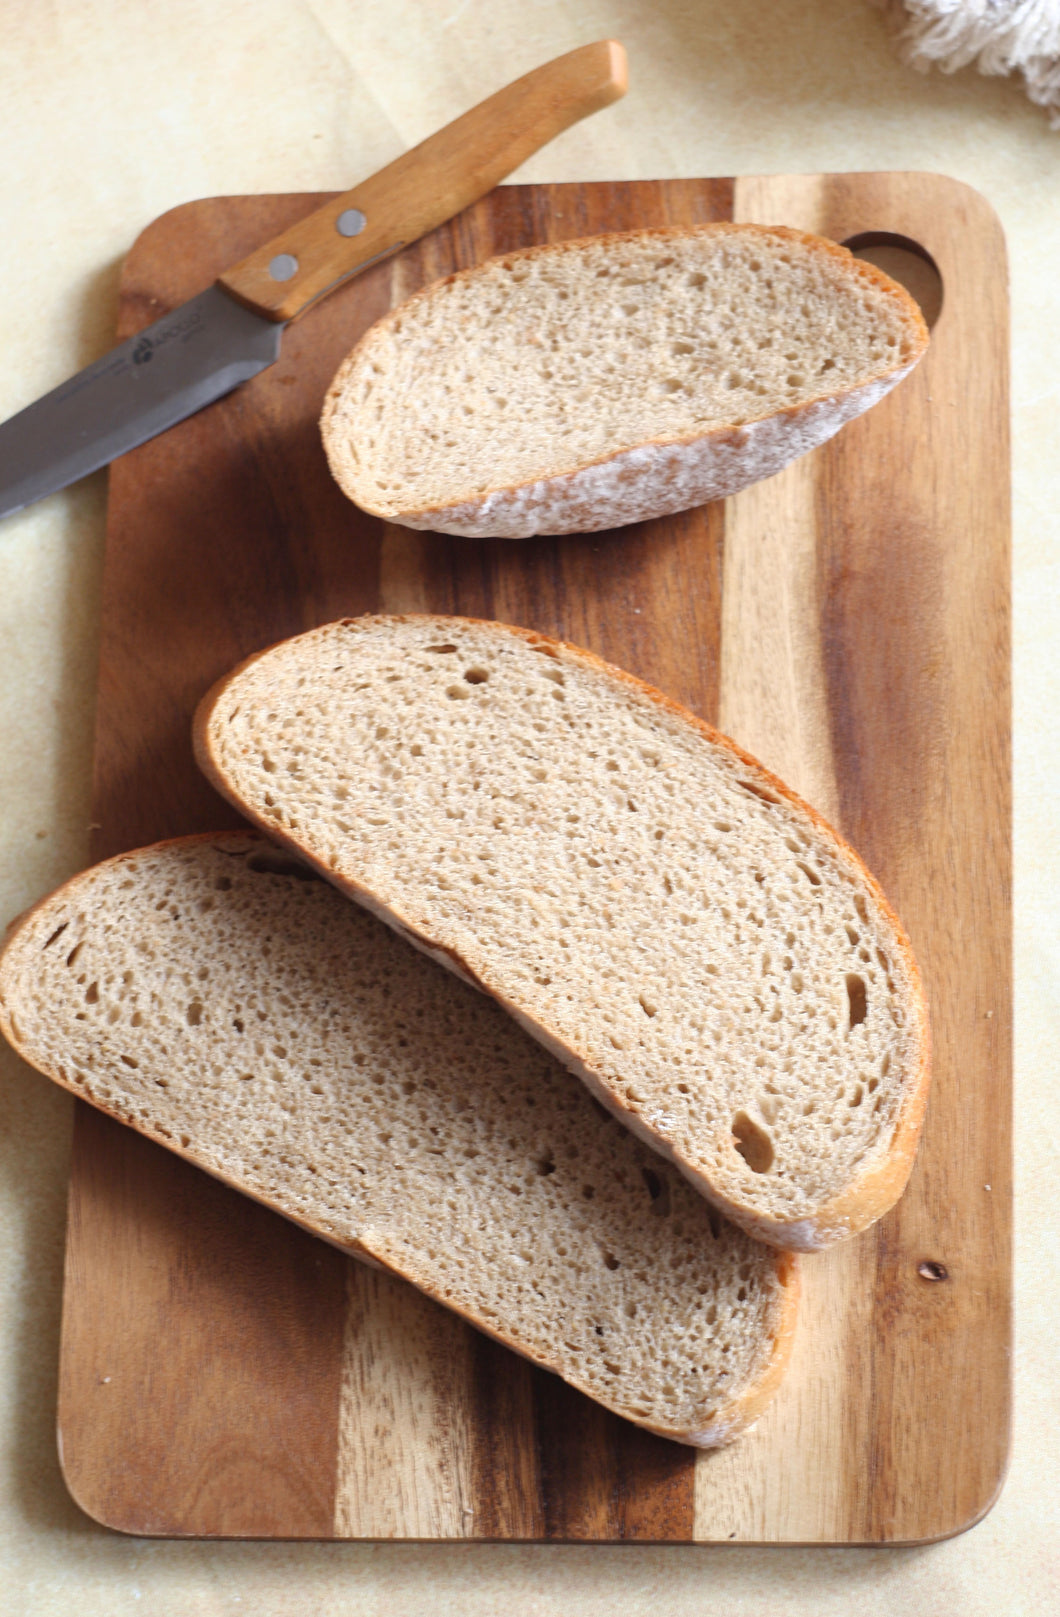 Rye Bread Unseeded or Seeded